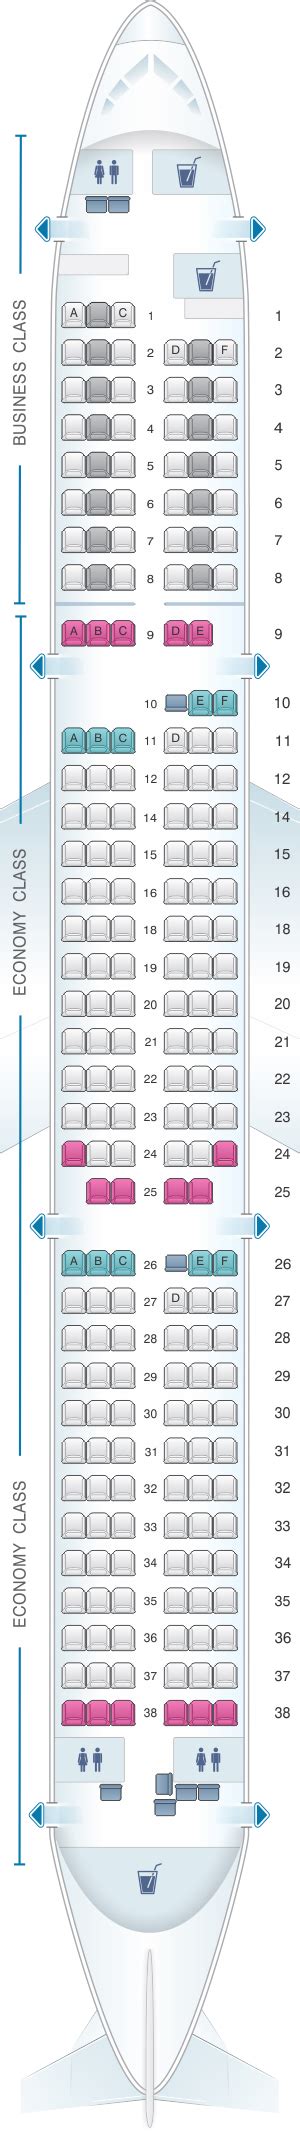 The Airbus A333 seating plan allows up to 300 seats for passengers when configured with a two-class configuration. The purchasing airline can choose between first class and busines...